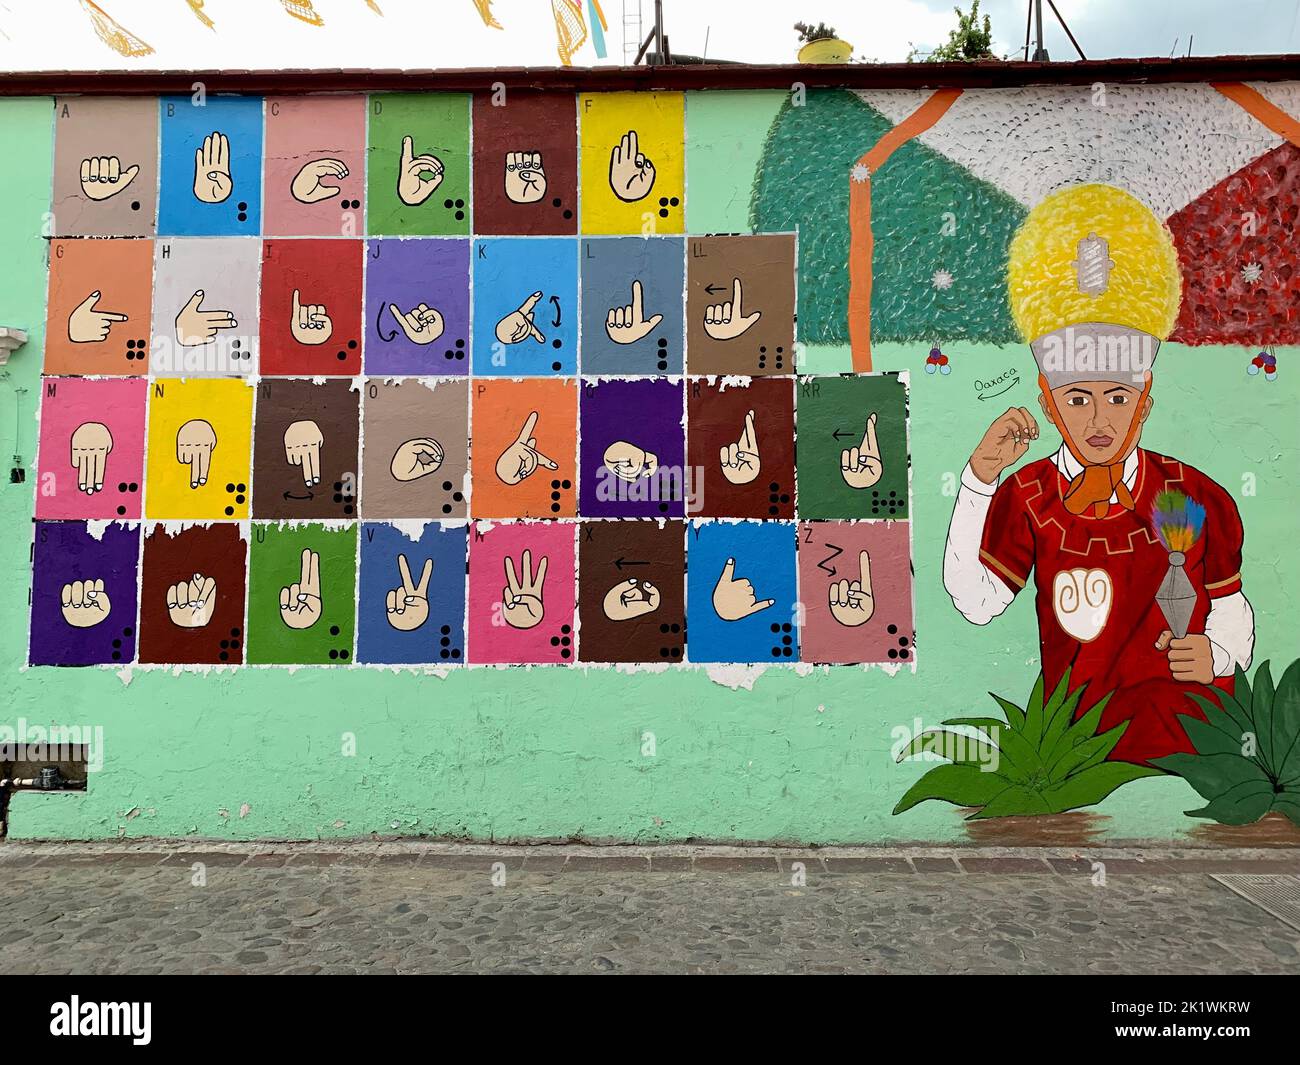 Indigenous sign language on a wall, Oaxaca , Mexico Stock Photo